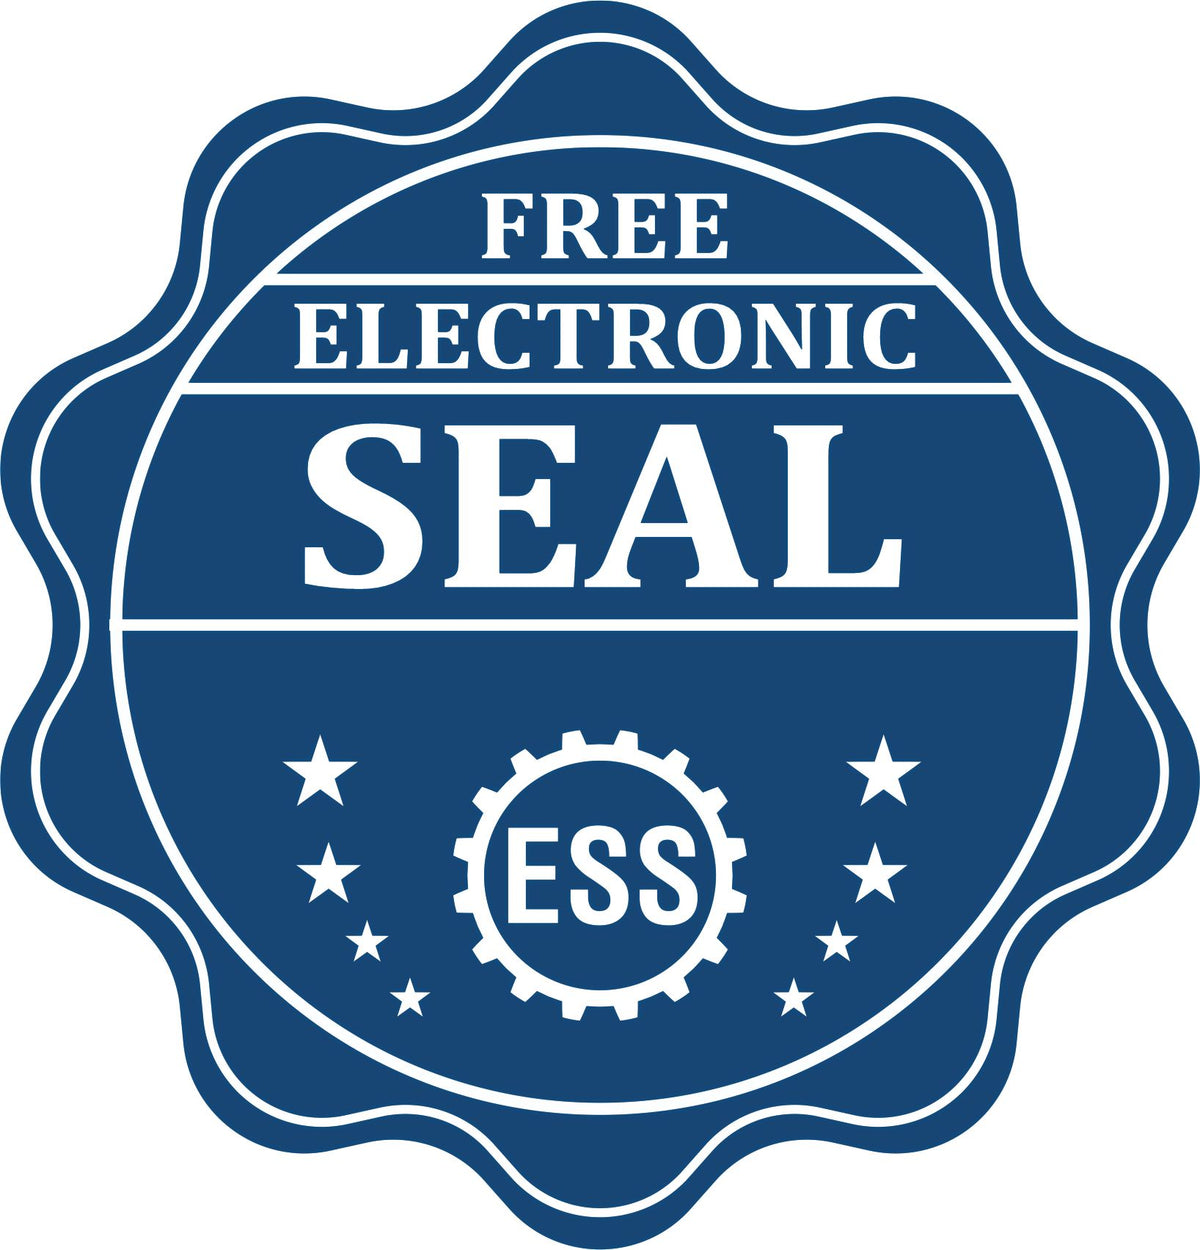 A badge showing a free electronic seal for the Premium MaxLight Pre-Inked Missouri Landscape Architectural Stamp with stars and the ESS gear on the emblem.